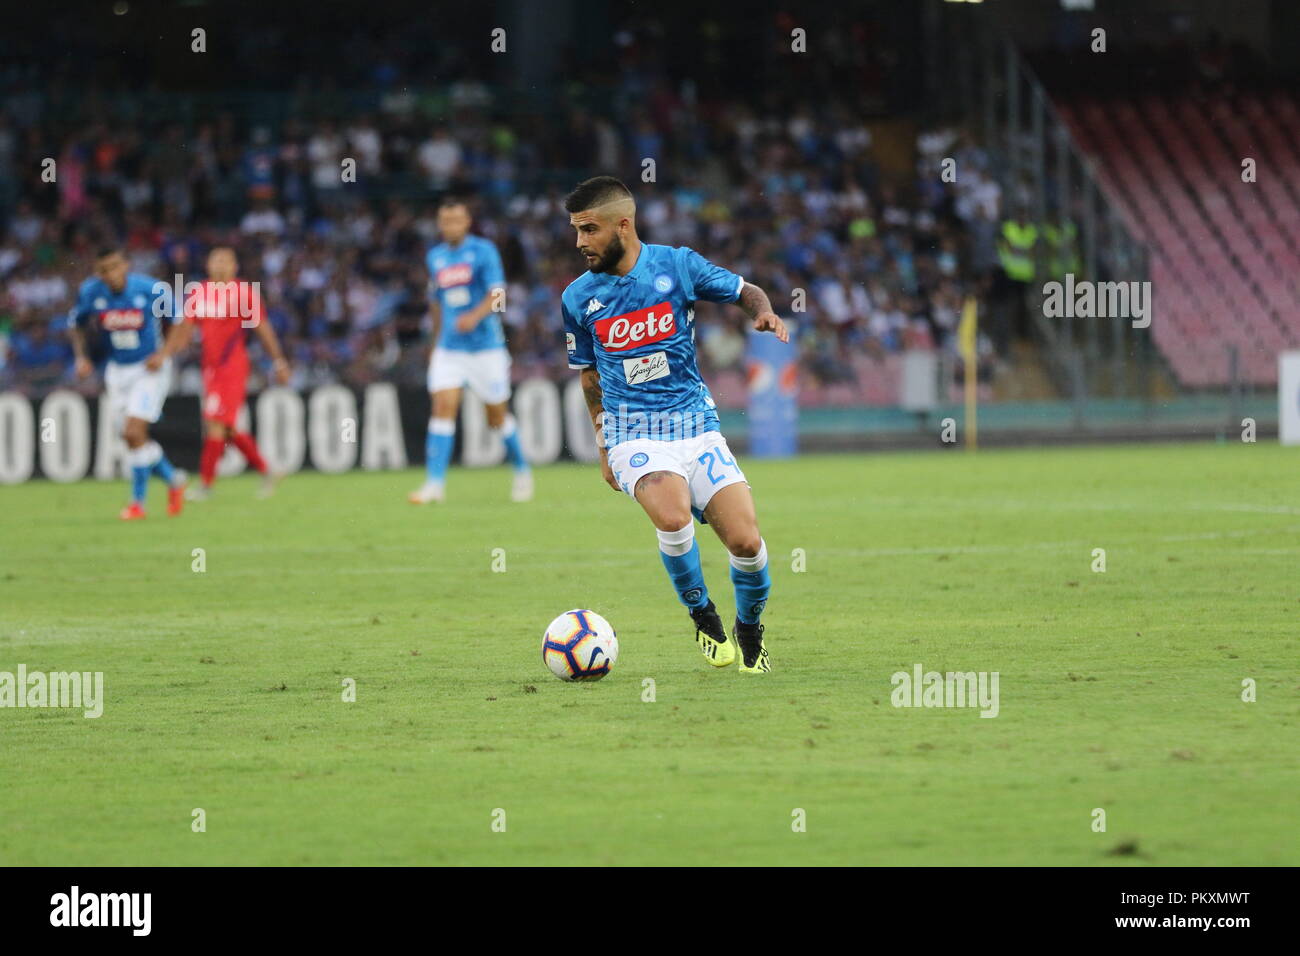 Naples, Italy. 15th September 2018. In the picture the Napoli player Lorenzo Insigne.Stadium San Paolo Naples. 15th Sep, 2018. 09/15/2018 - Italy.final result SSC Napoli 1 AC Fiorentina 0. Credit: Fabio Sasso/ZUMA Wire/Alamy Live News Stock Photo